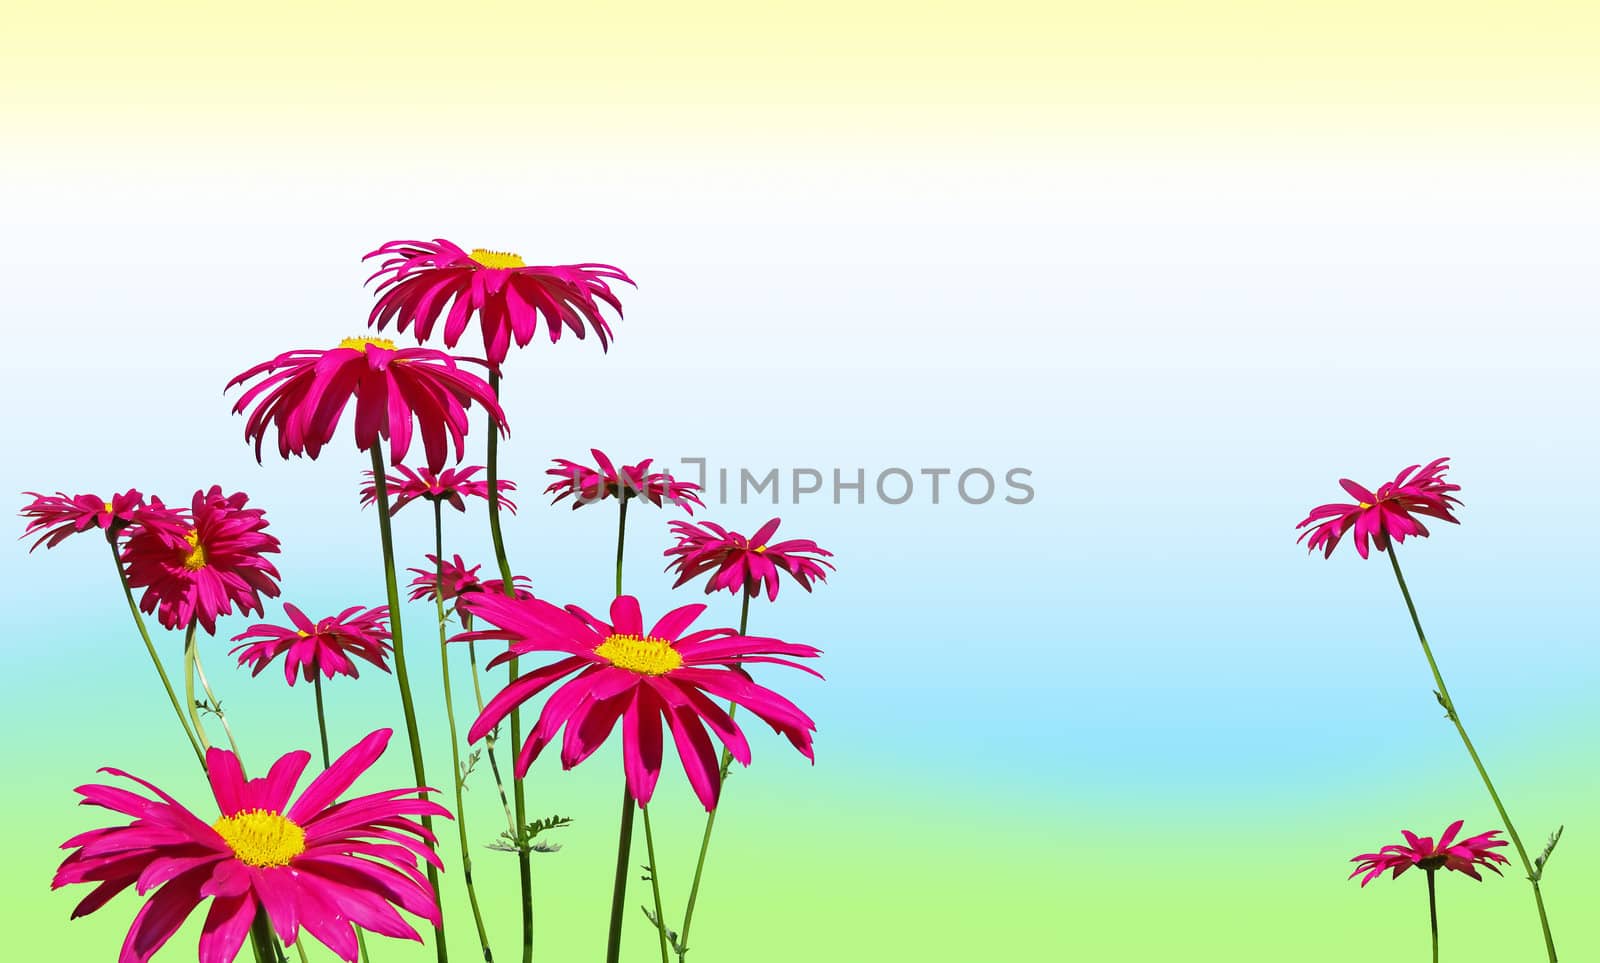 Pink daisy flowers on pastel colors by Mirage3